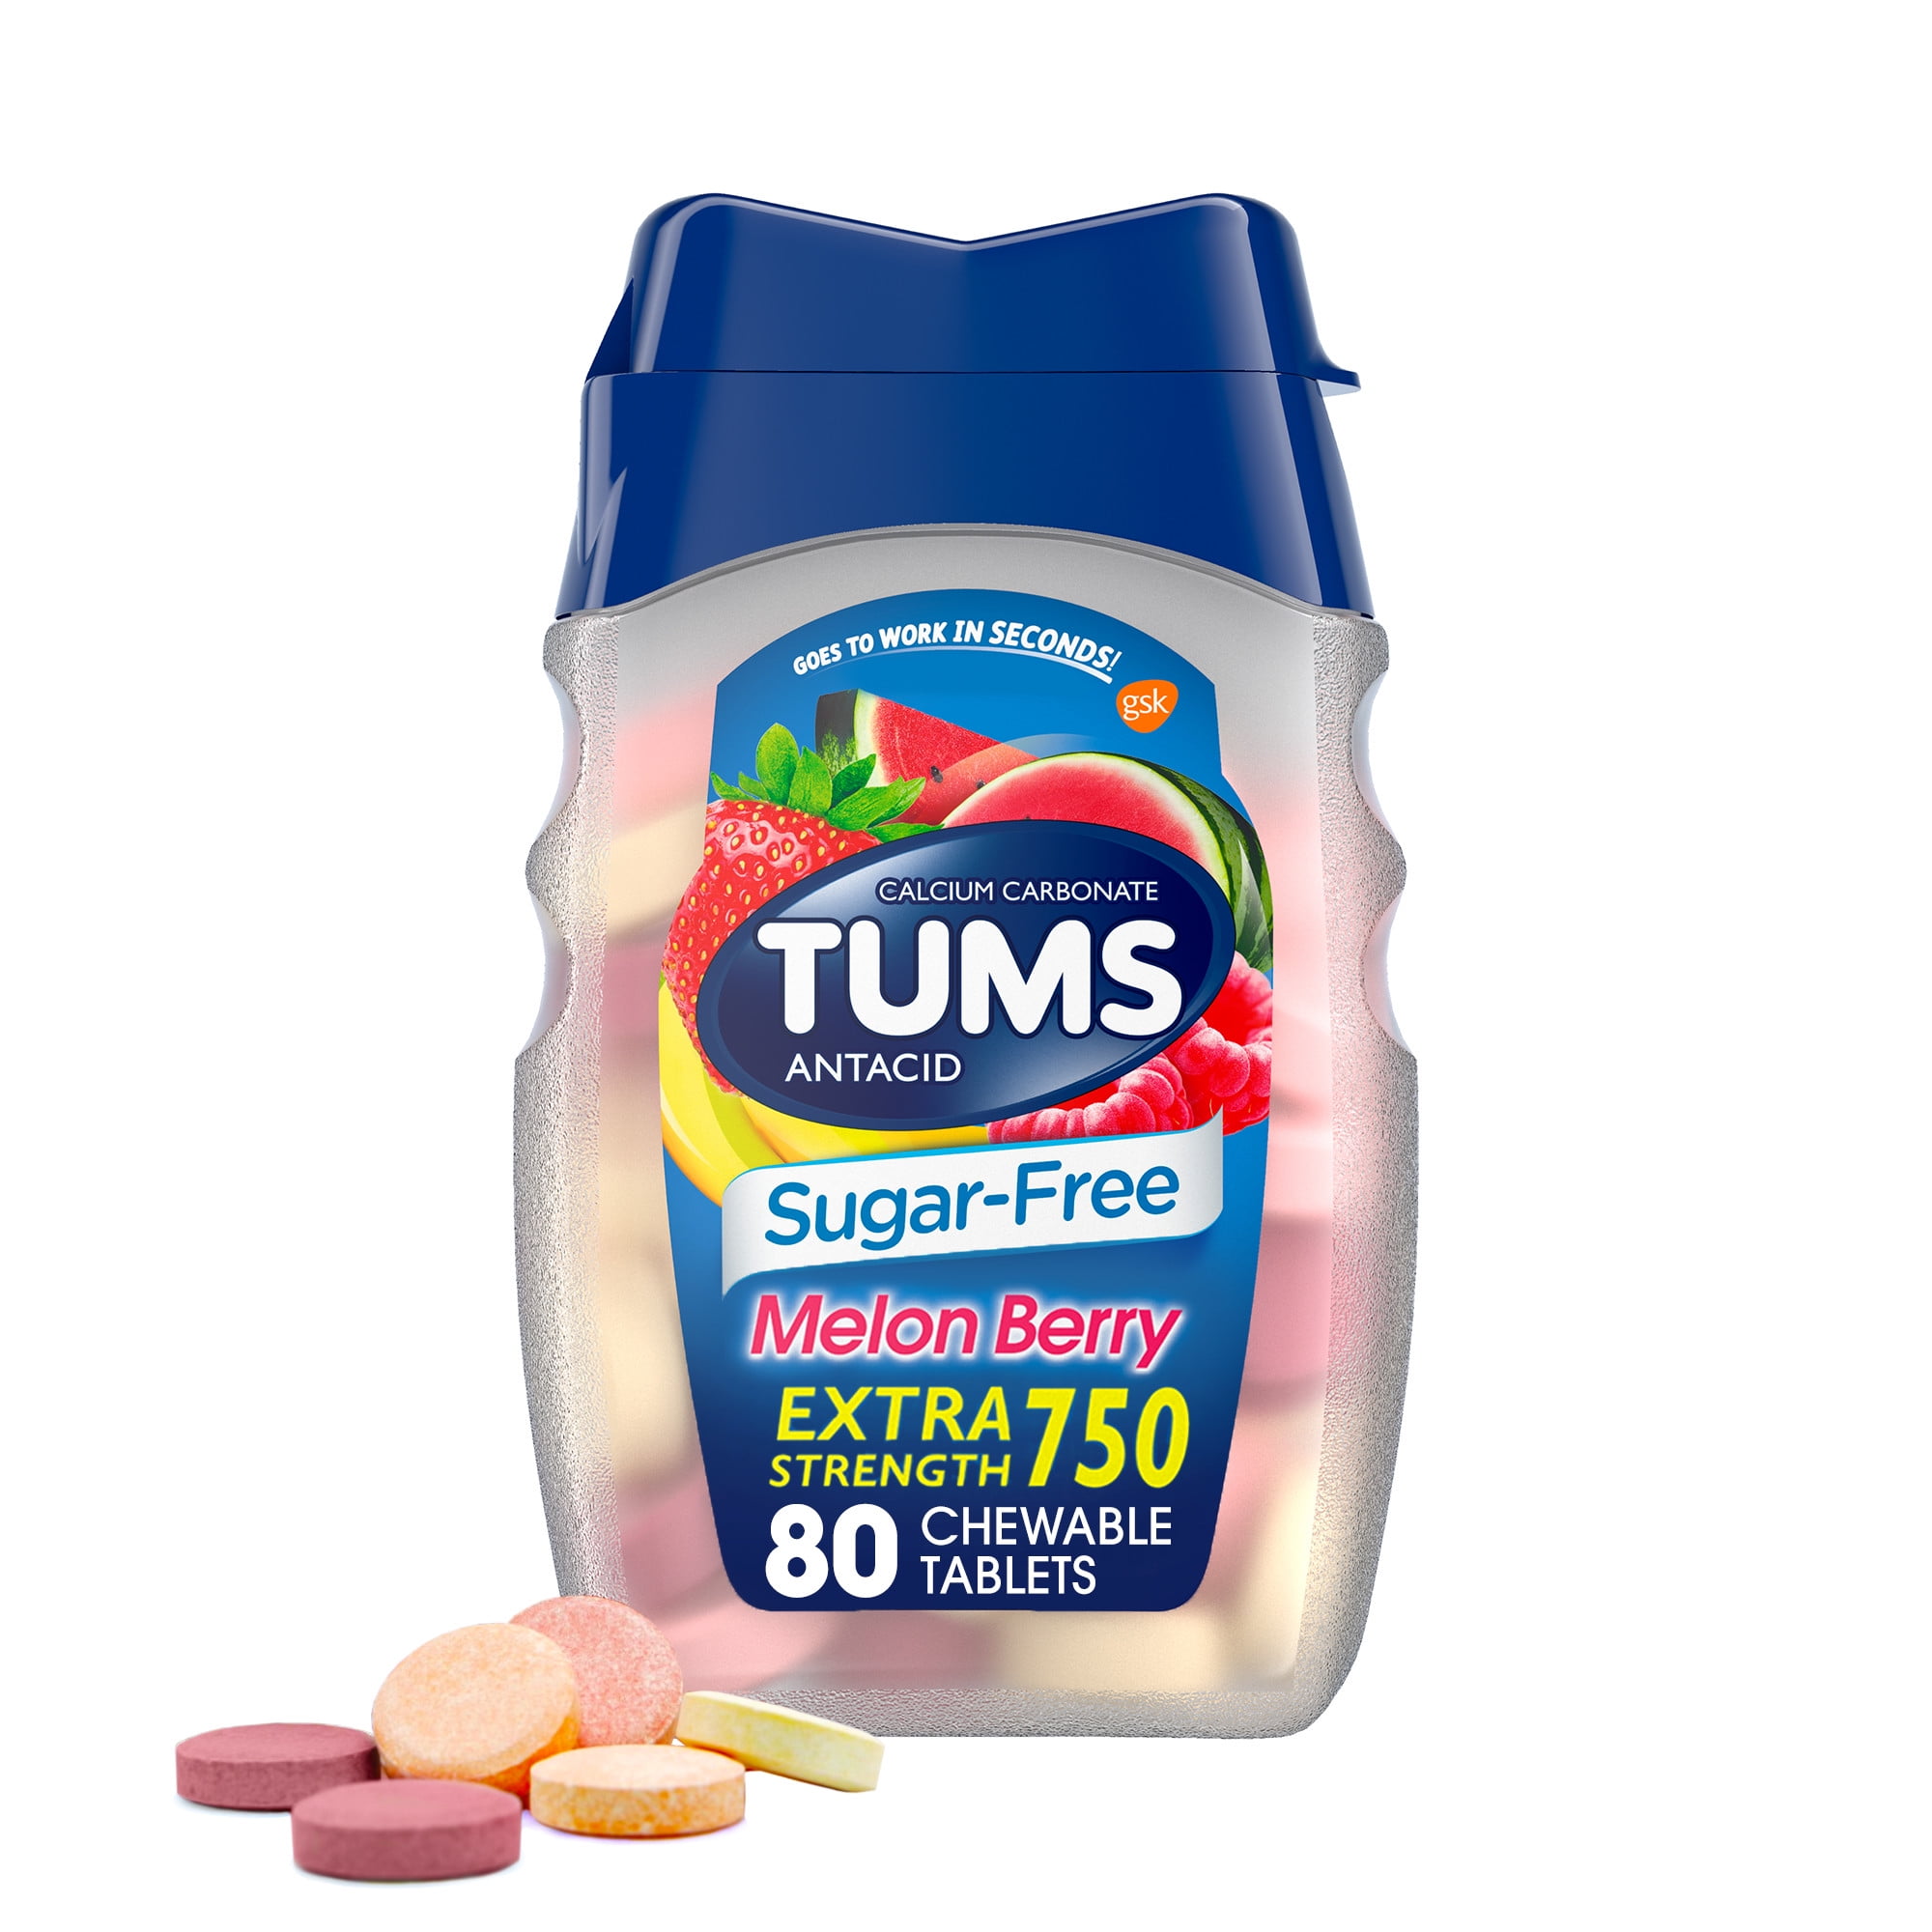 Tums Melon Berry Extra Strength Sugar-Free Chewable Antacid Tablets, 80 Ct